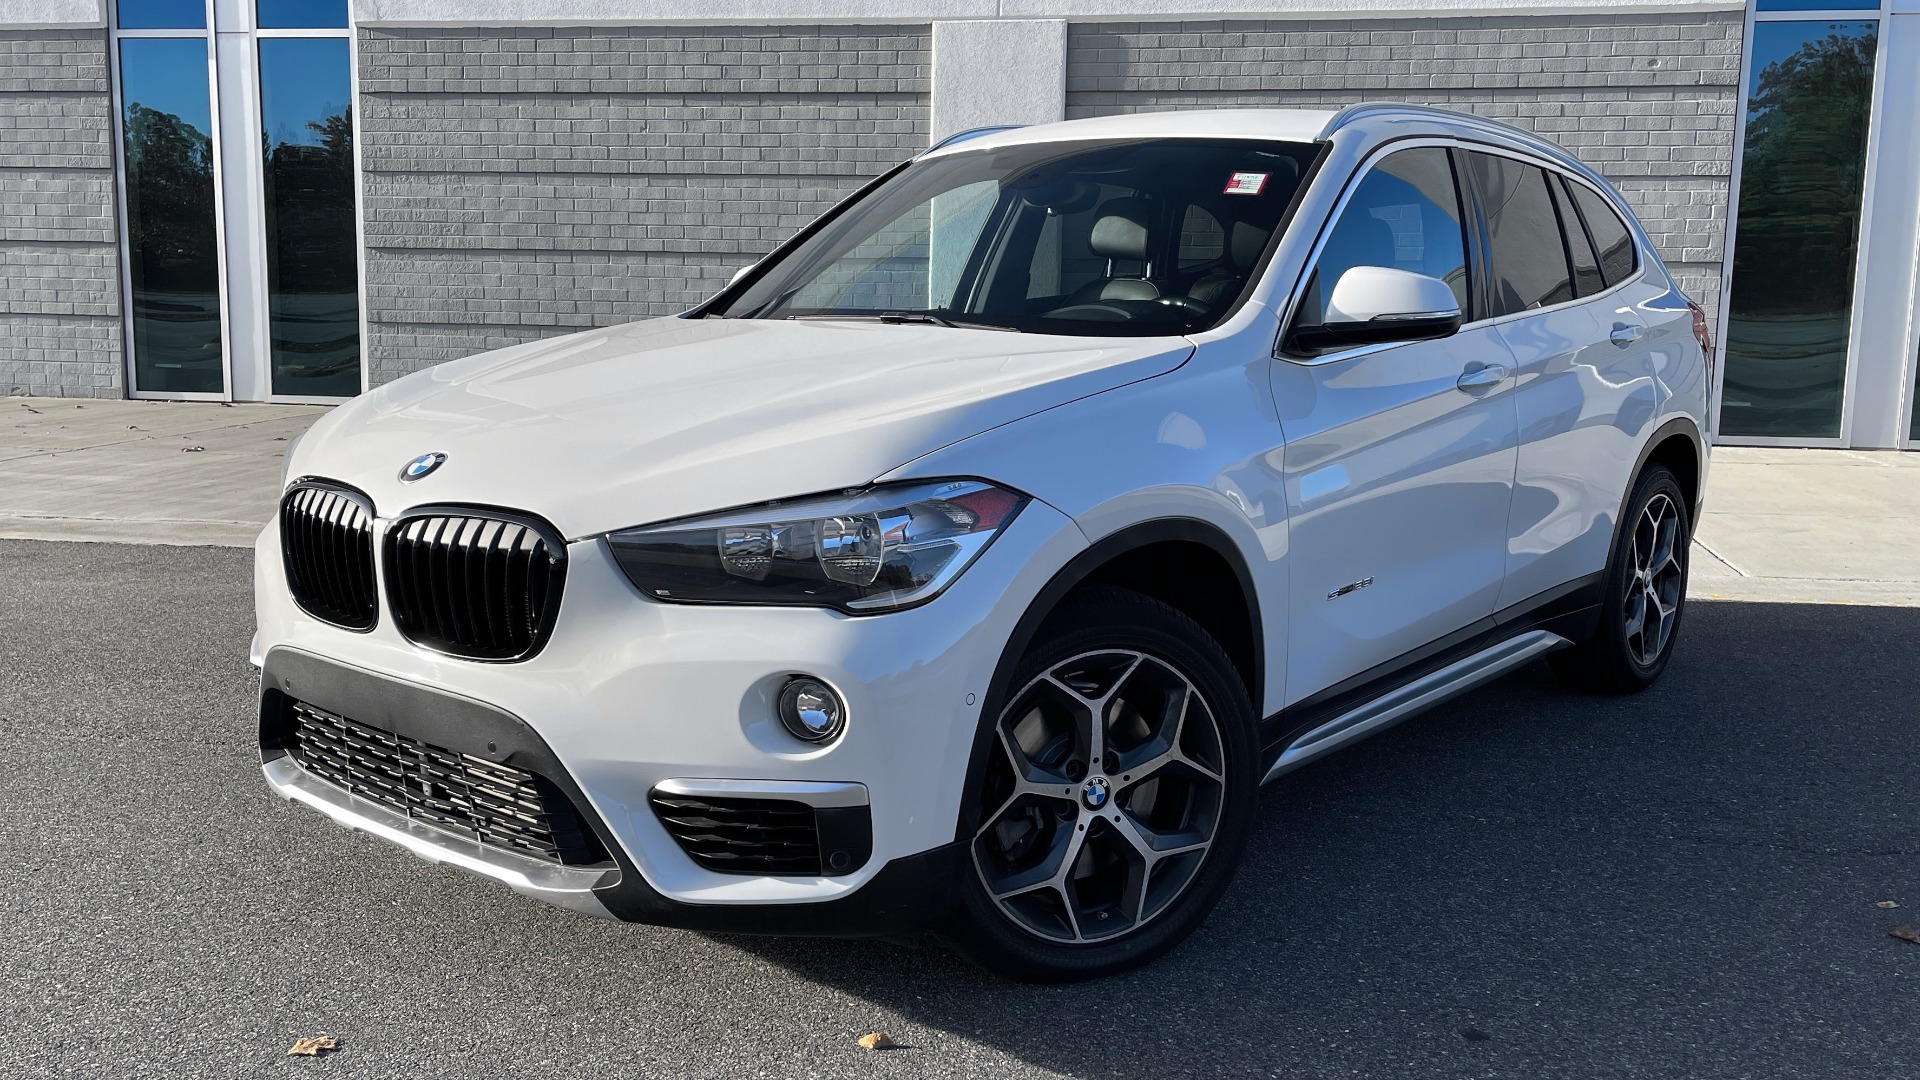 Used 2018 BMW X1 SDRIVE28I 2.0L / PARK DIST CNTRL / 18IN WHEELS / REARVIEW for sale Sold at Formula Imports in Charlotte NC 28227 6